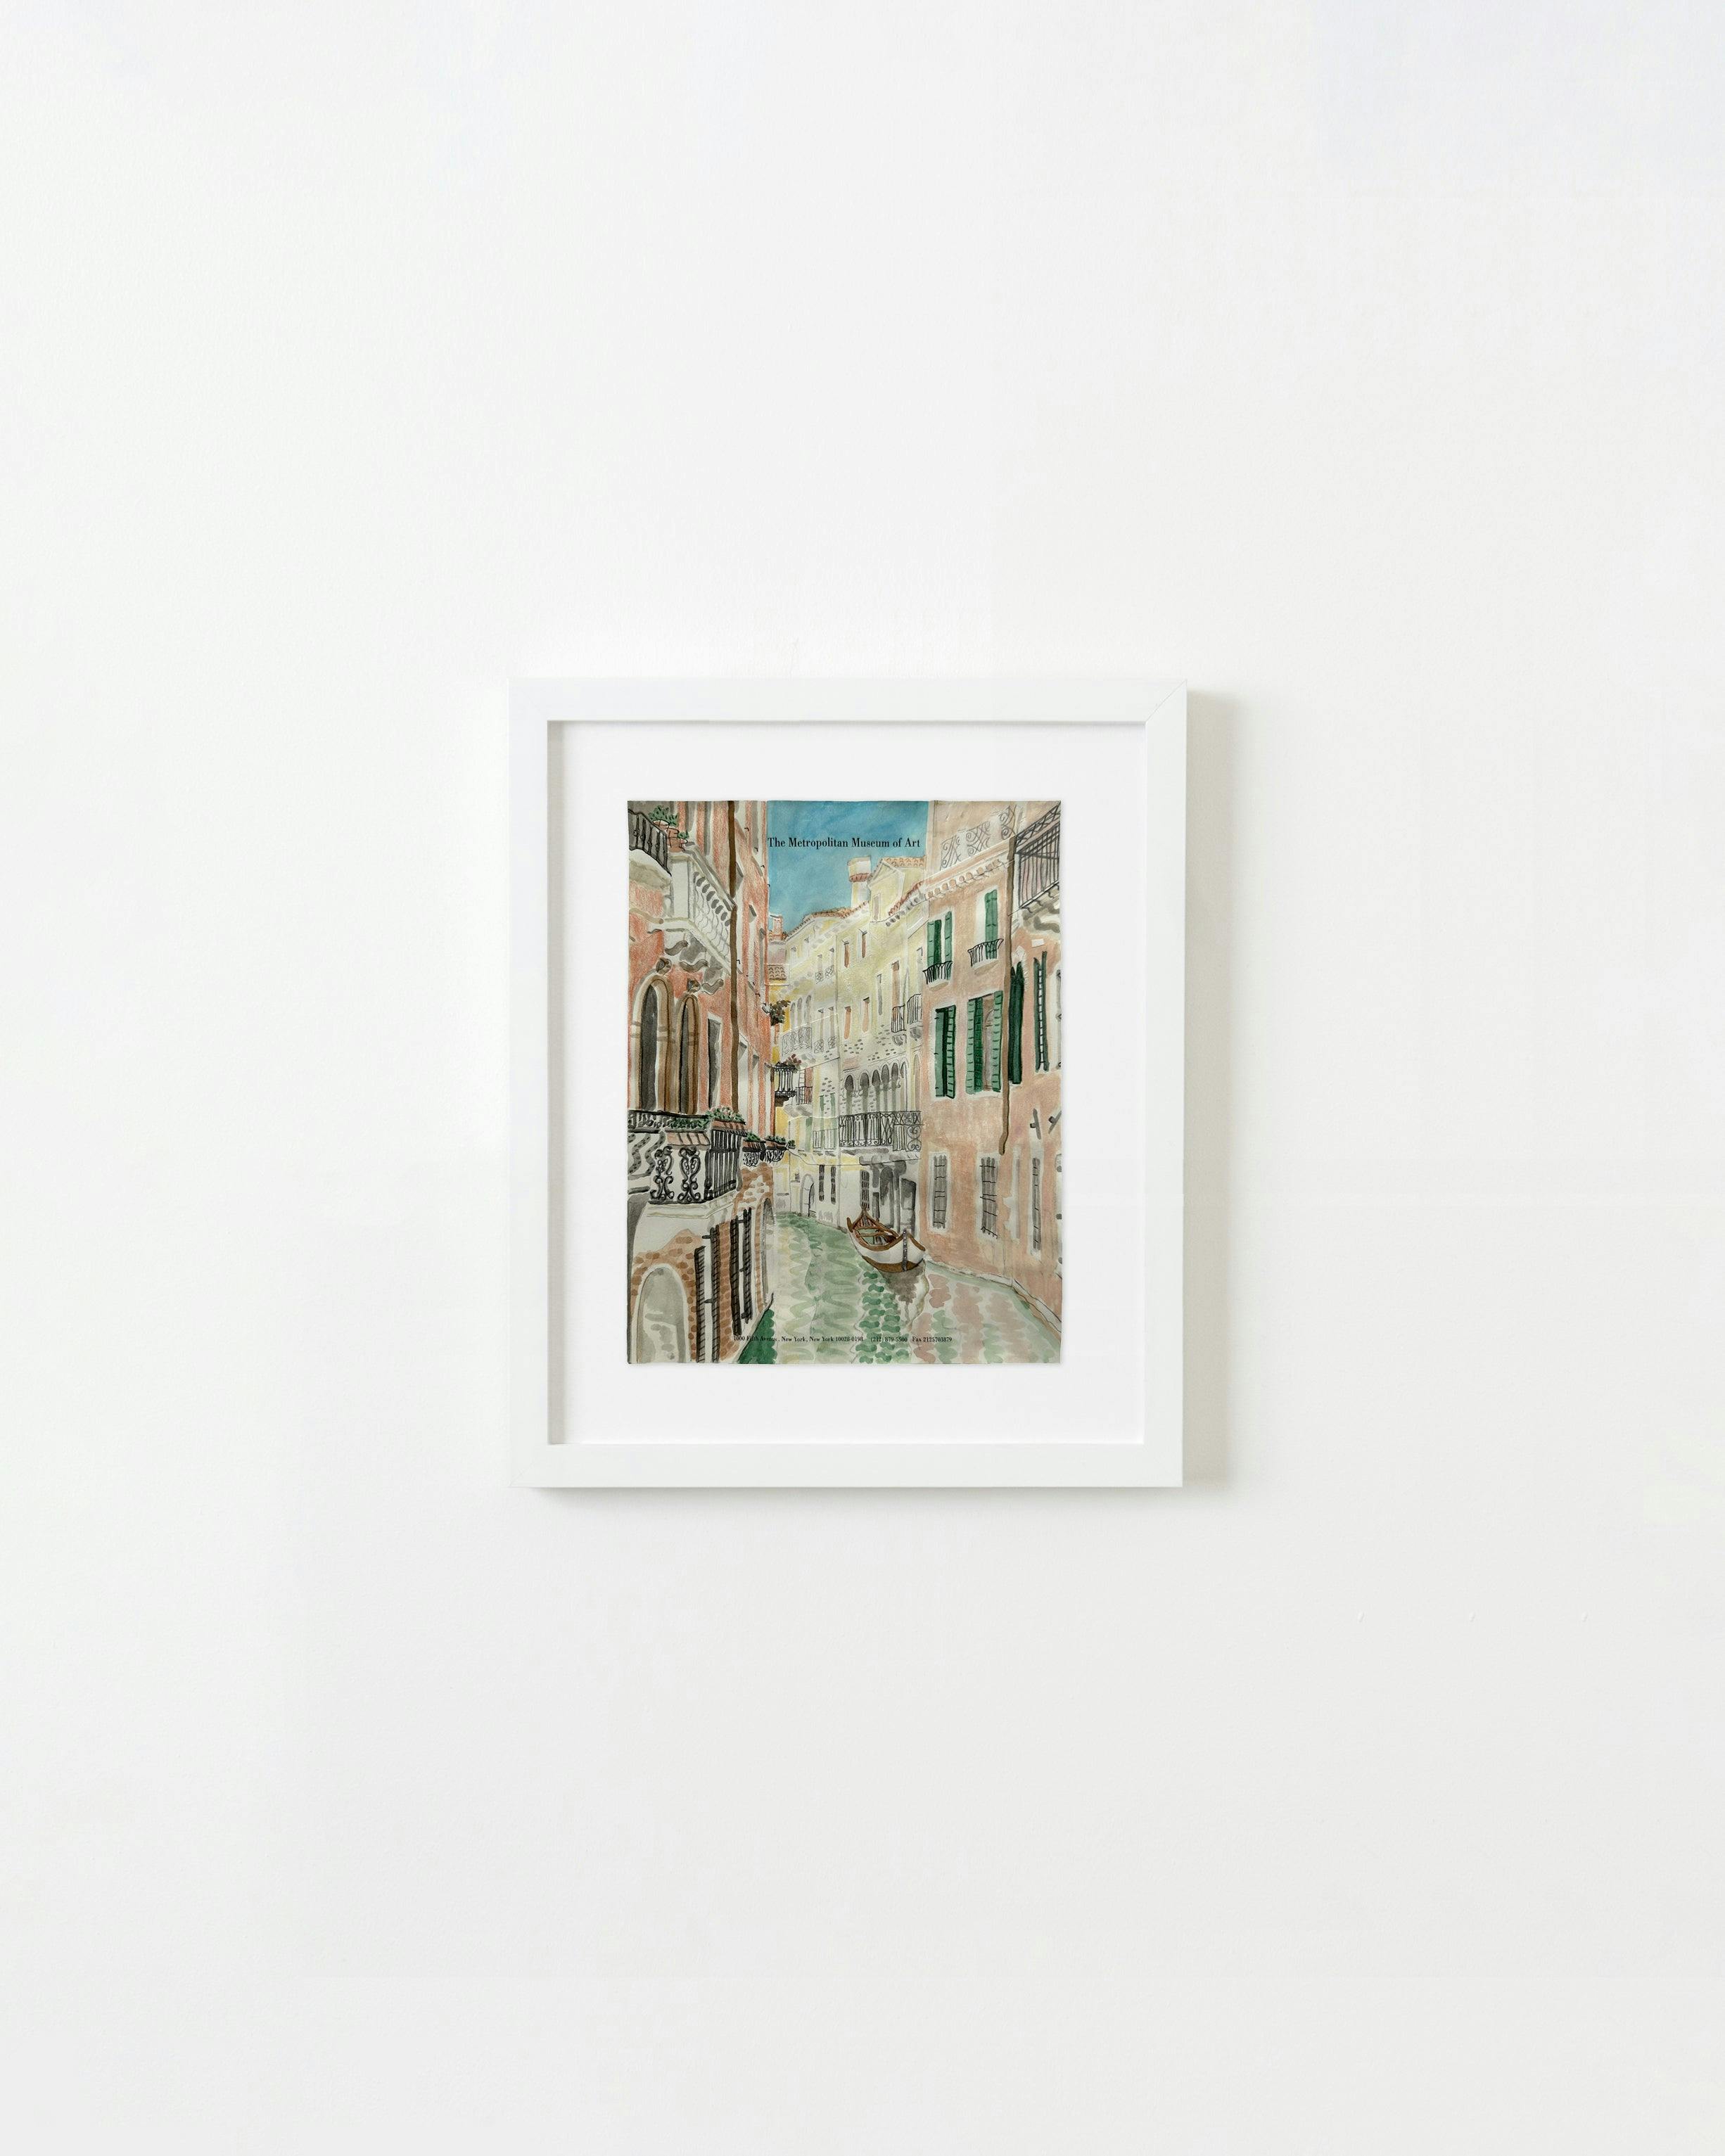 Painting by David Rhoads titled "Venice".